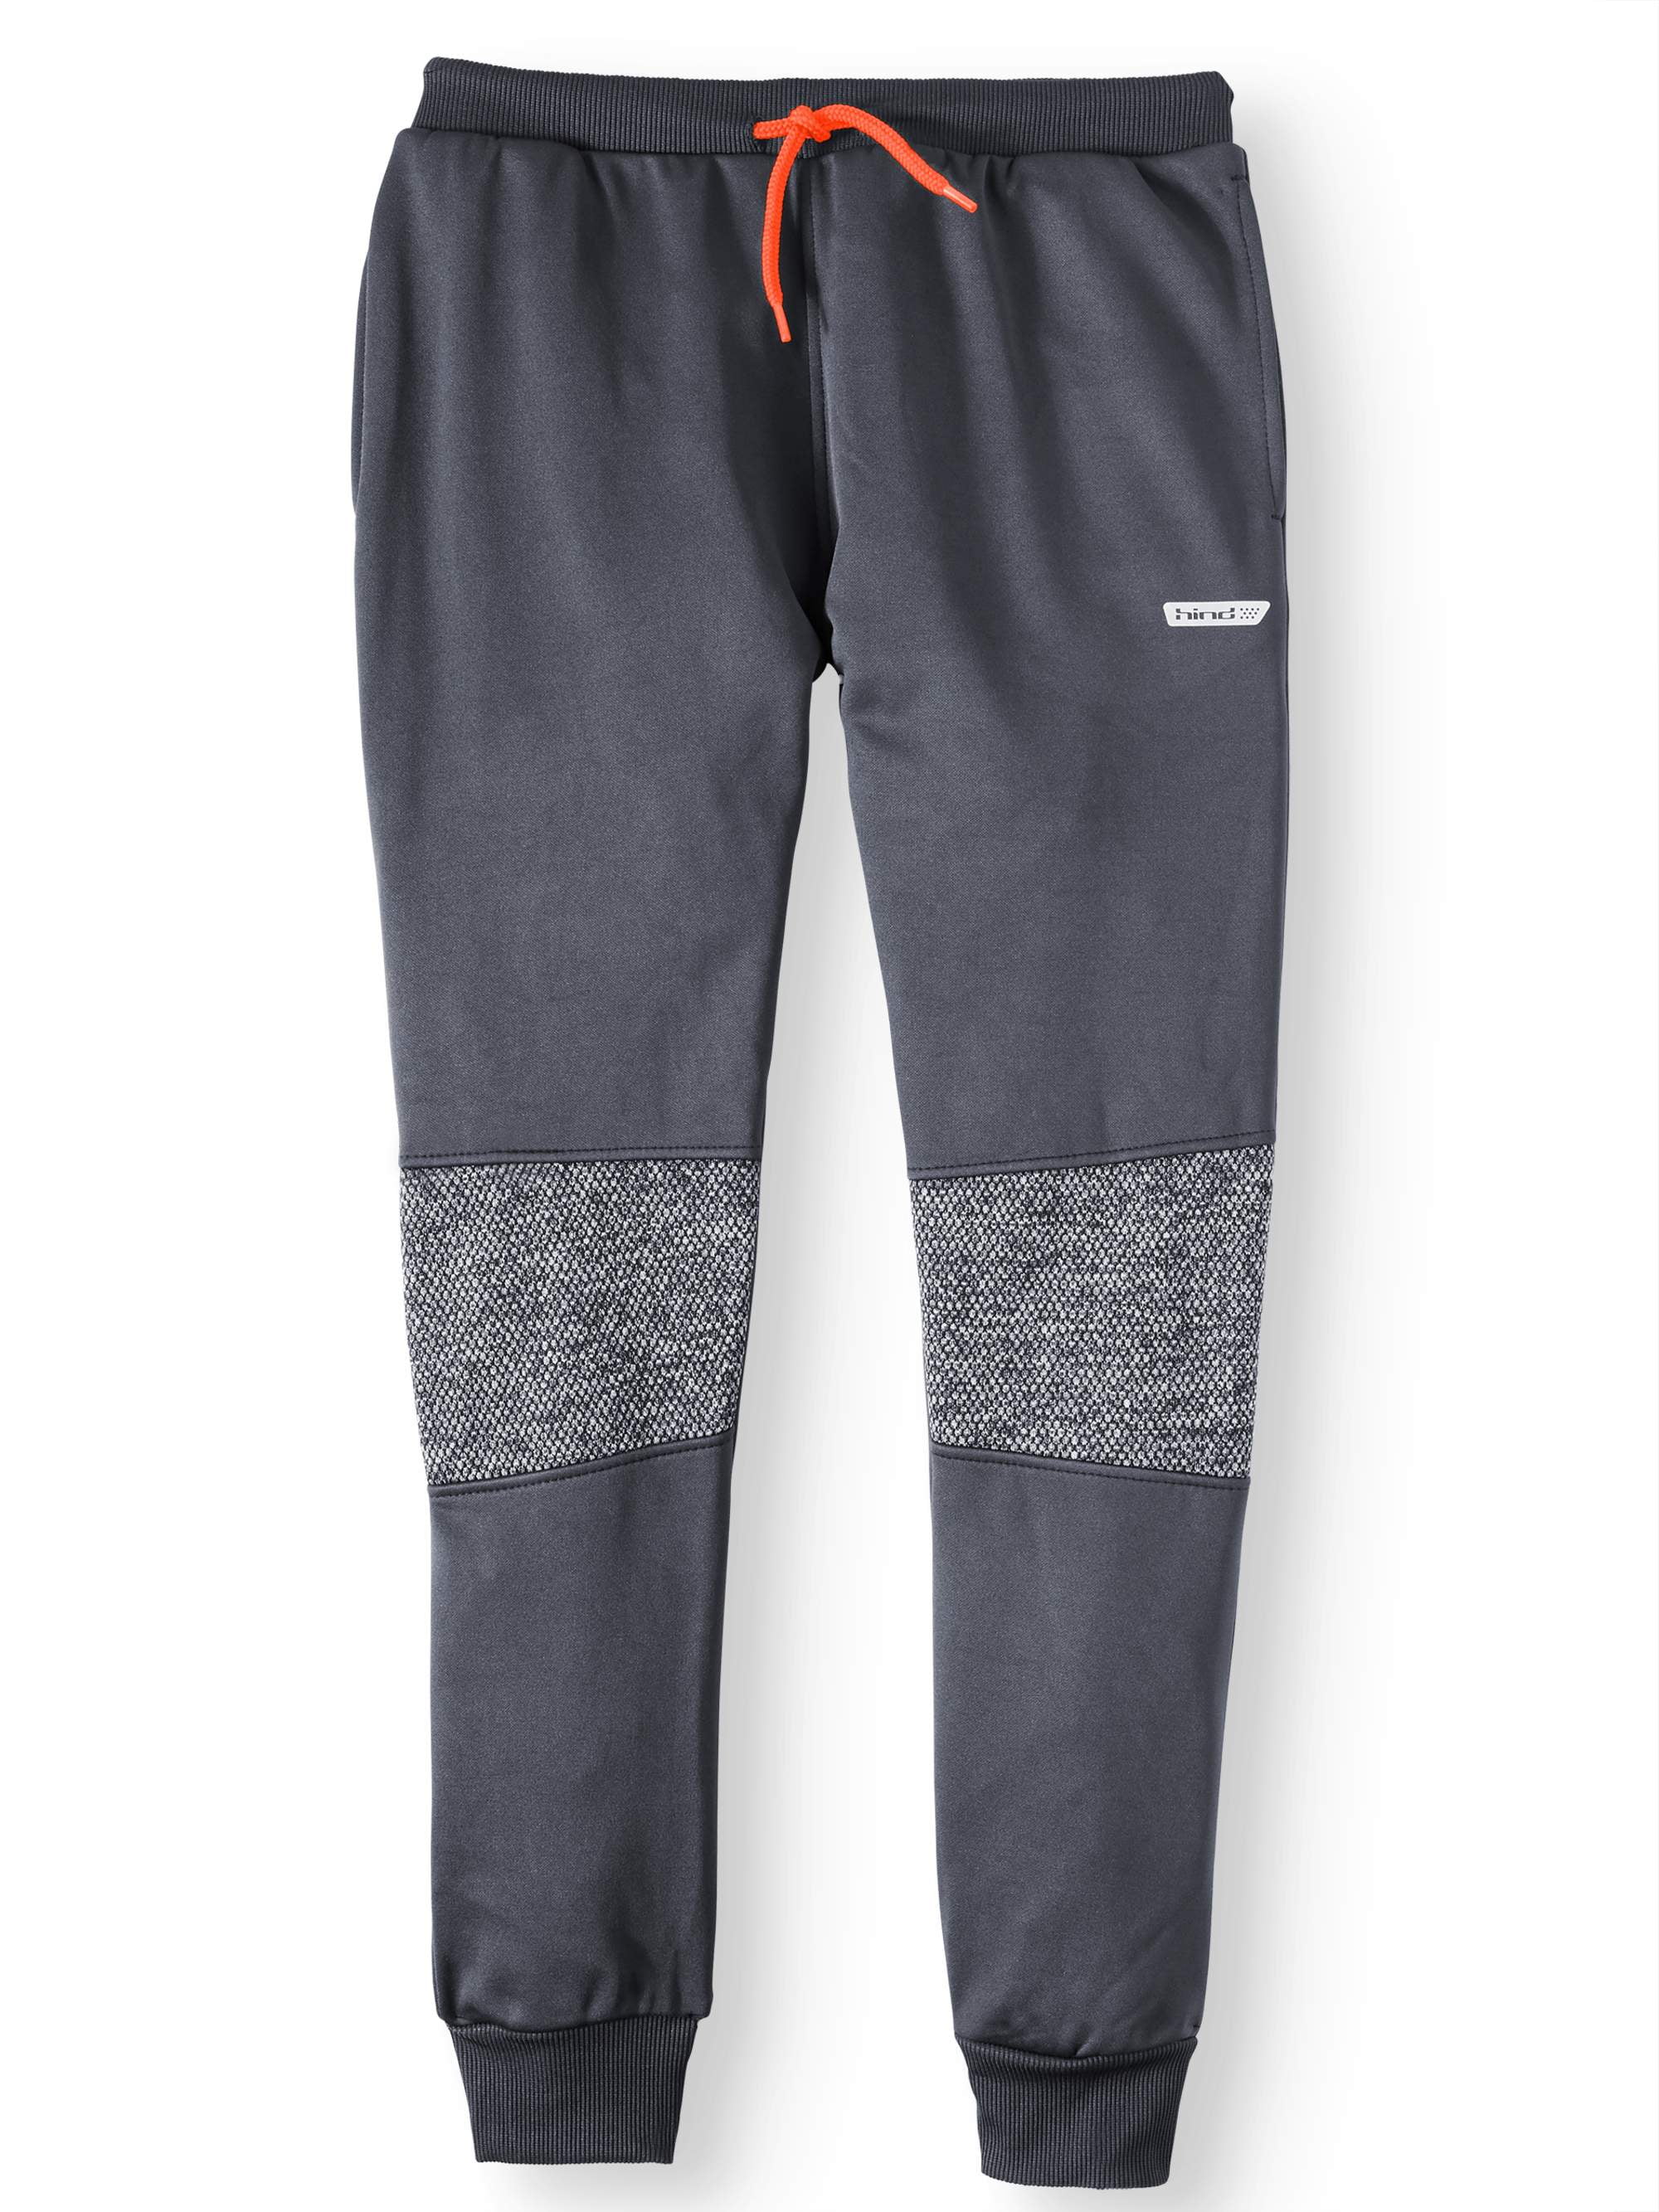 Hind Heavy Weight Jogger Pant with Contrast Knee (Big Boy) - Walmart.com